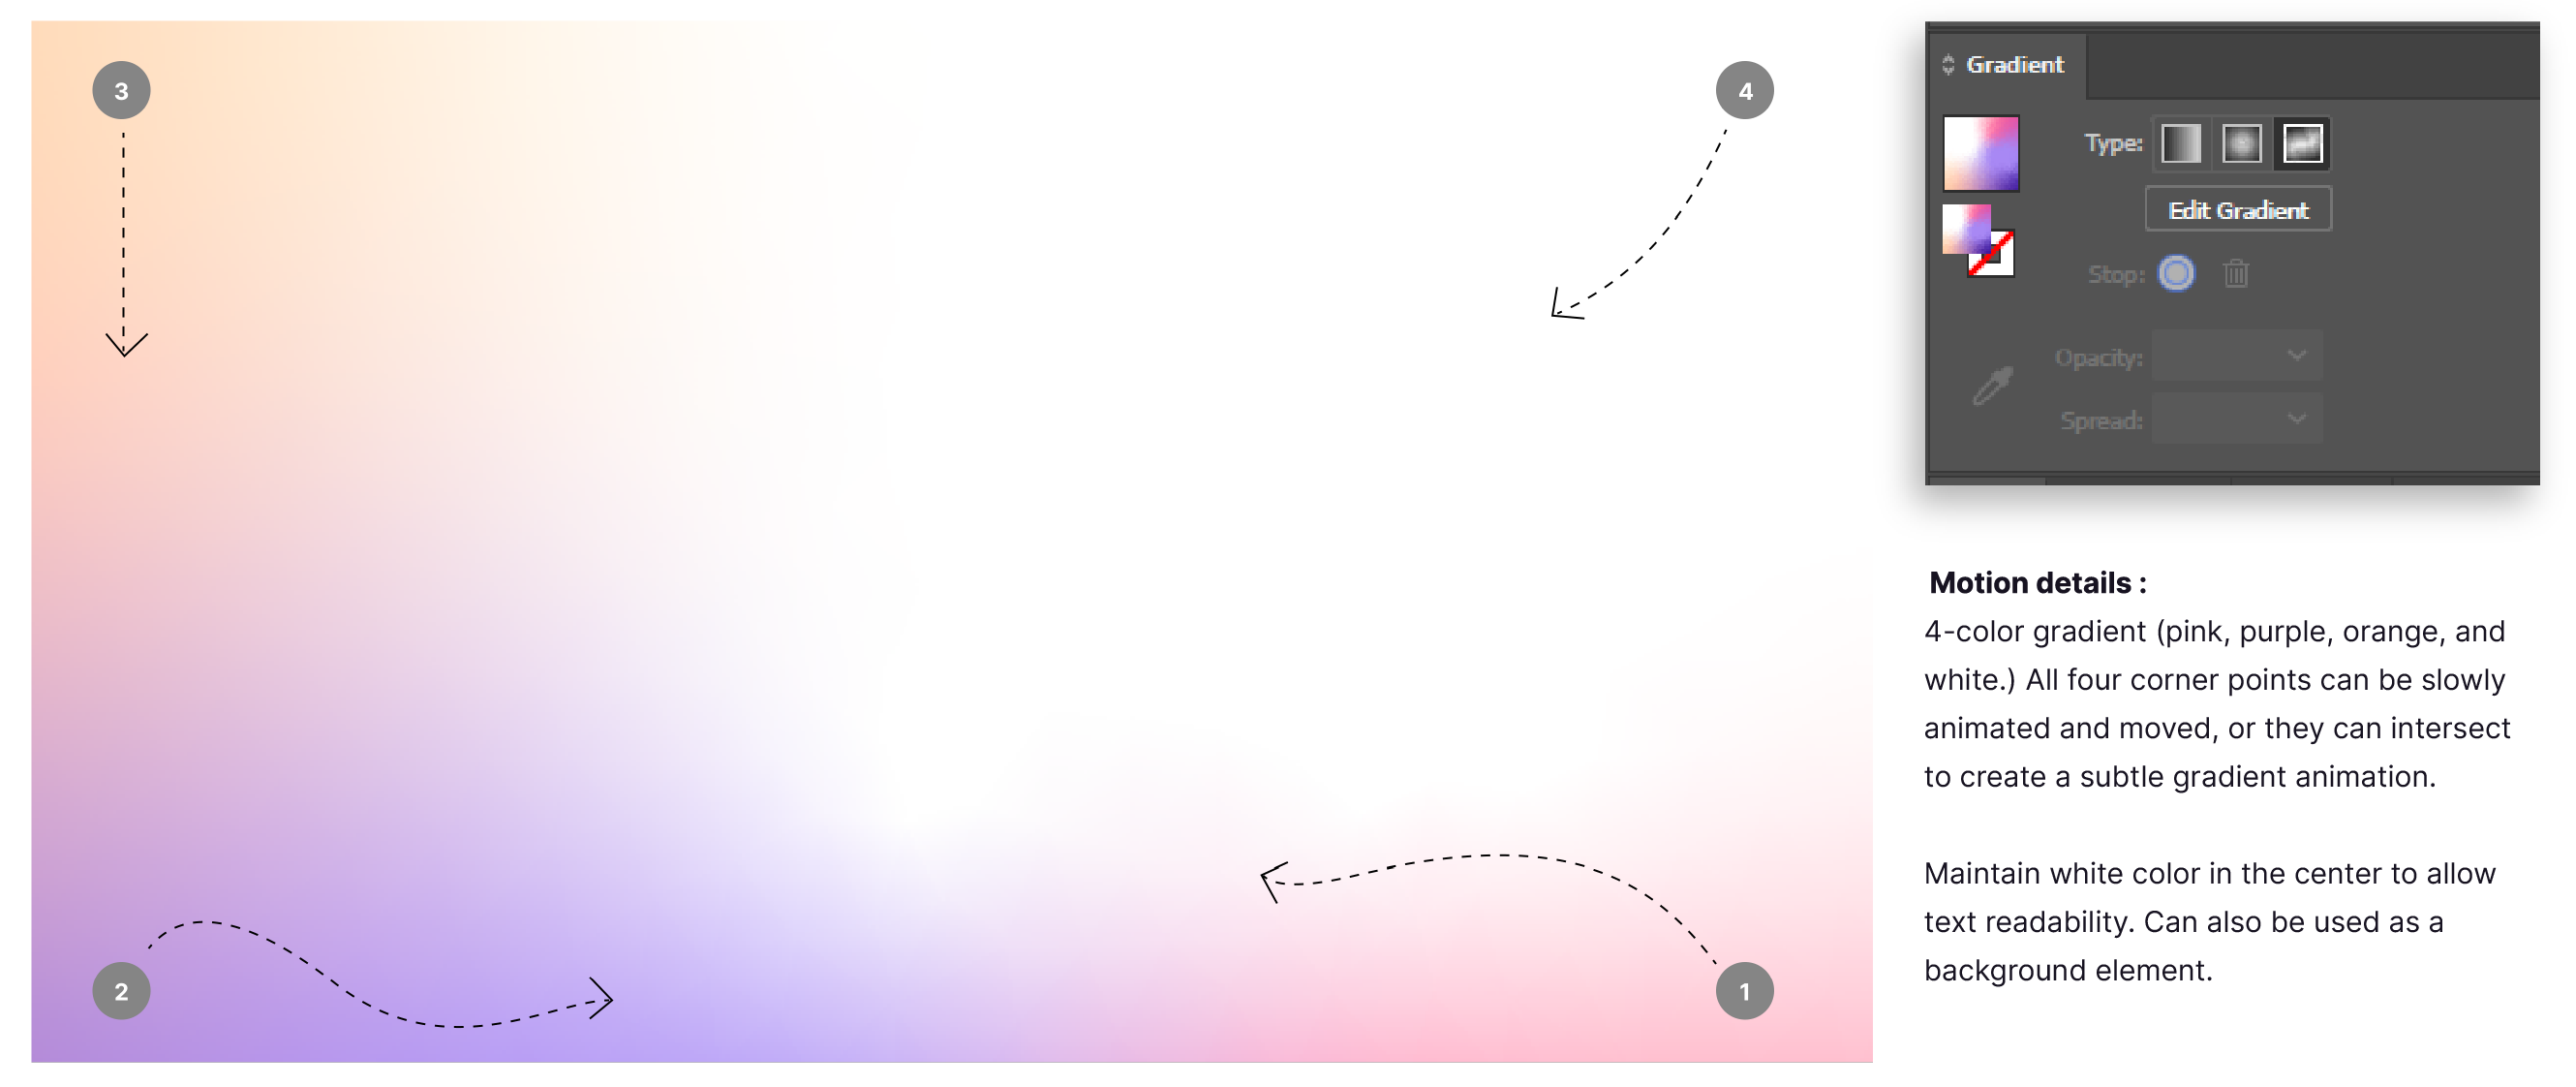 4 color, soft gradient example with motion details